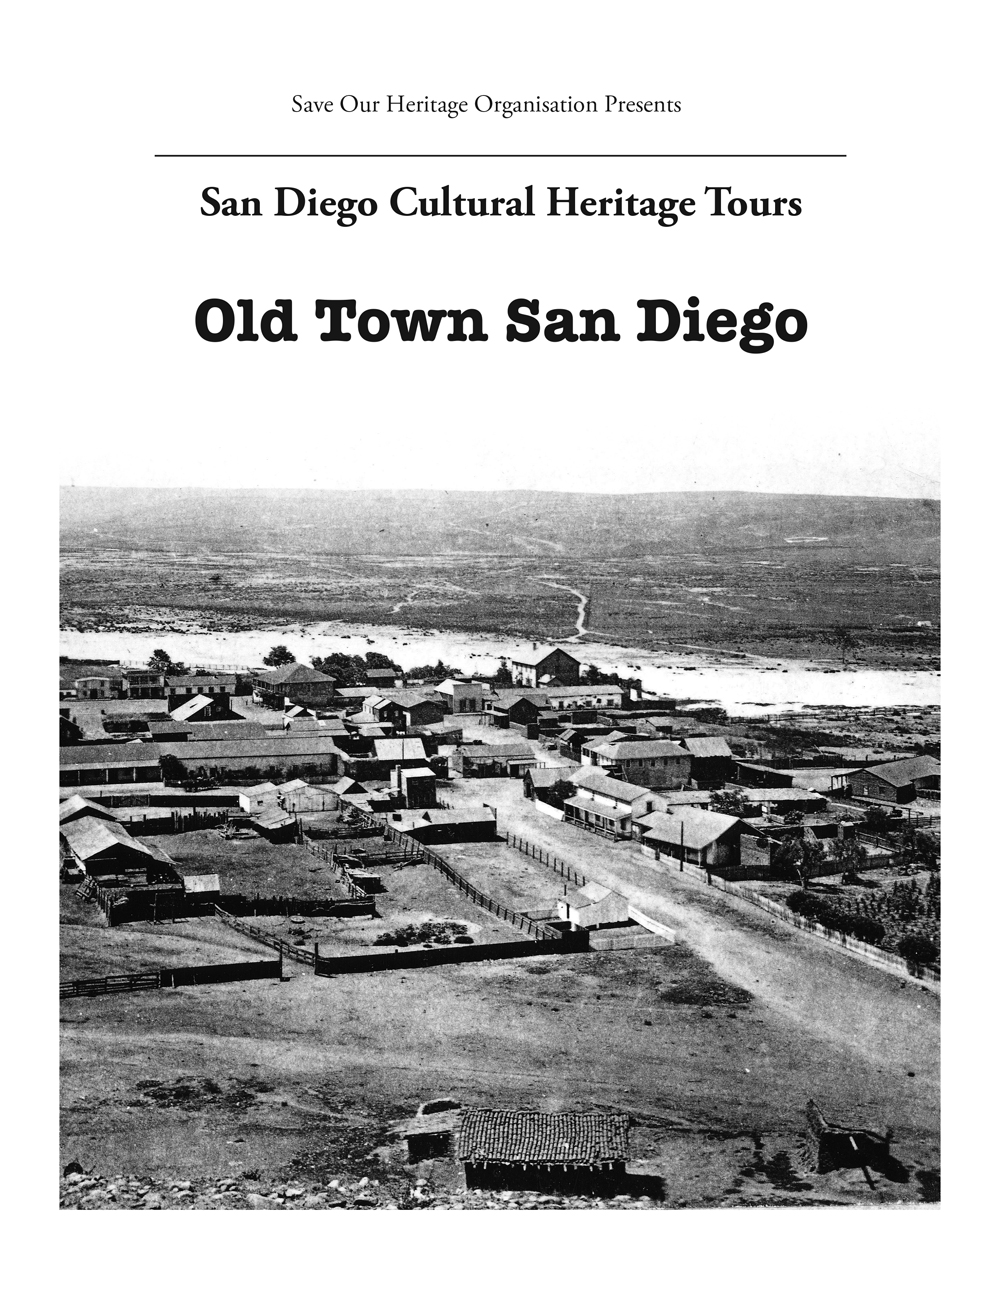 cover of the Old Town San Diego cultural heritage tour